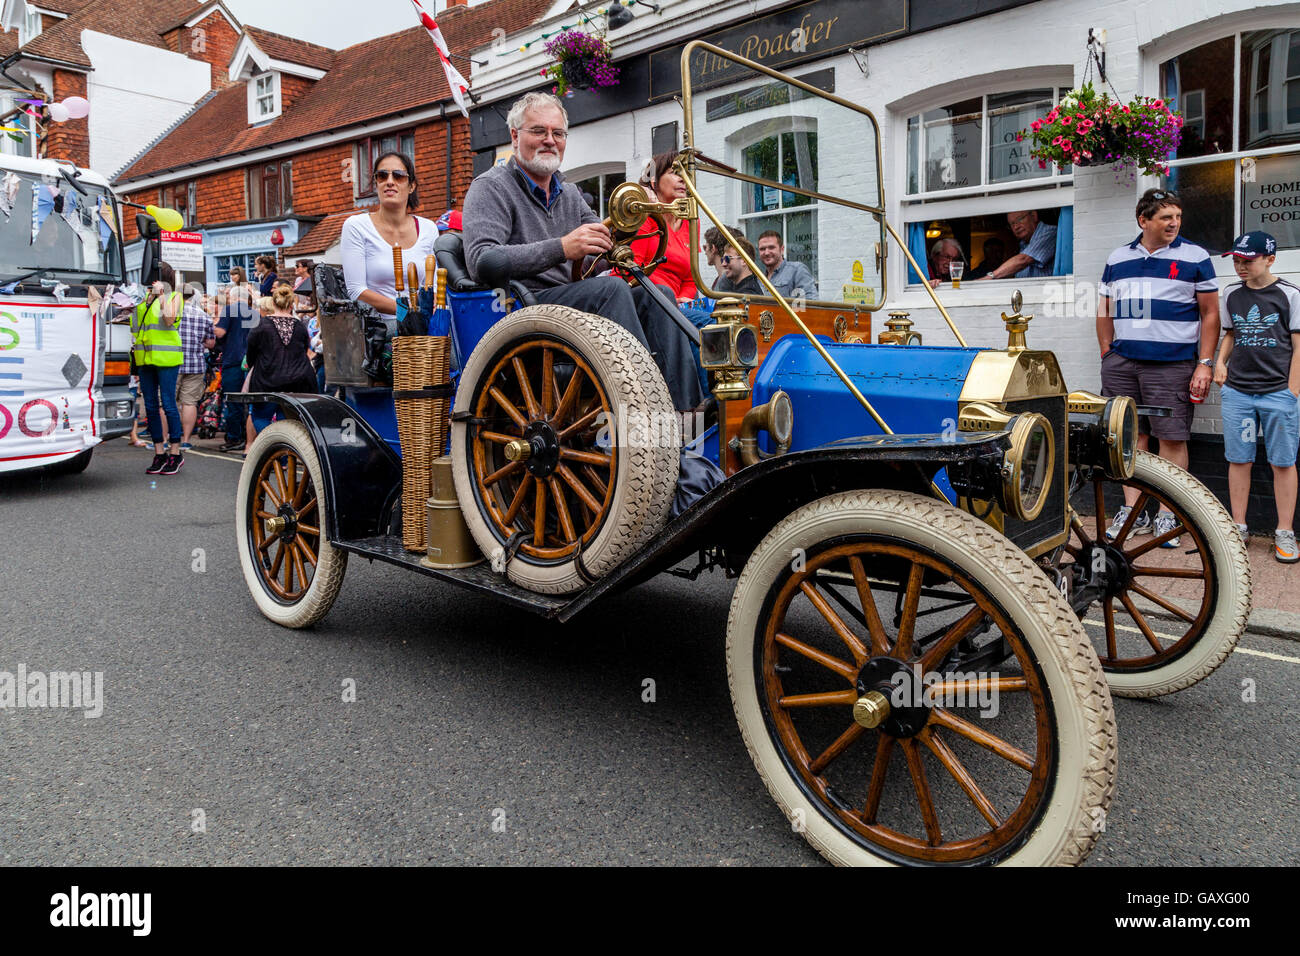 An Old Fashioned Car Takes Part In A Street Procession During The St Lawrence Fair, Hurstpierpoint, Sussex, UK Stock Photo